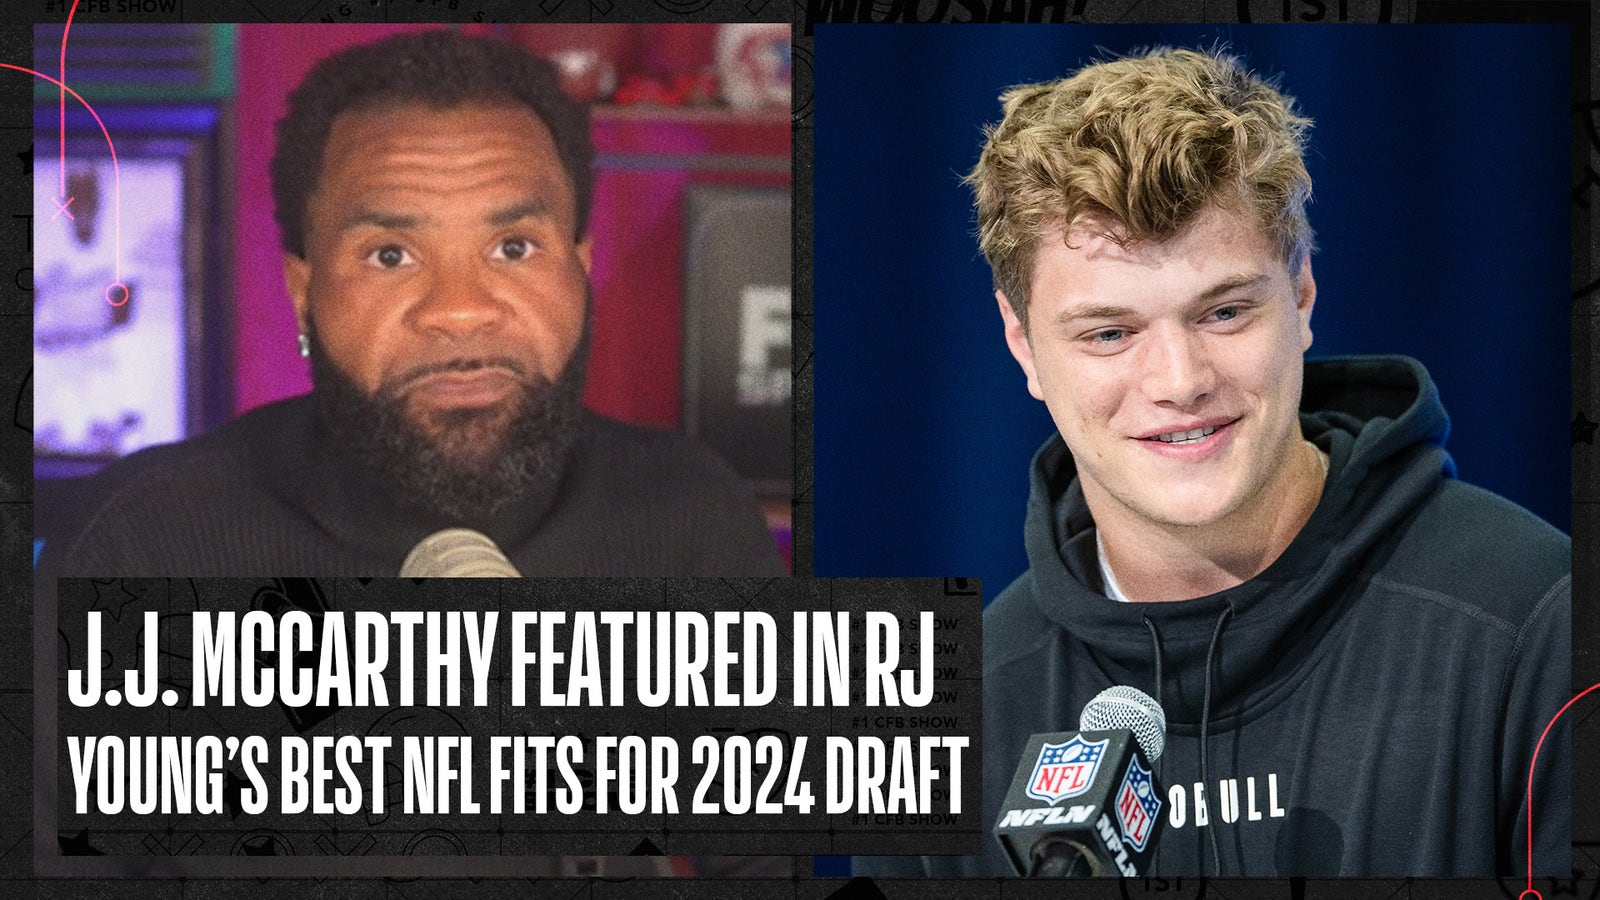 J.J. McCarthy featured on RJ Young’s best NFL fits for the draft